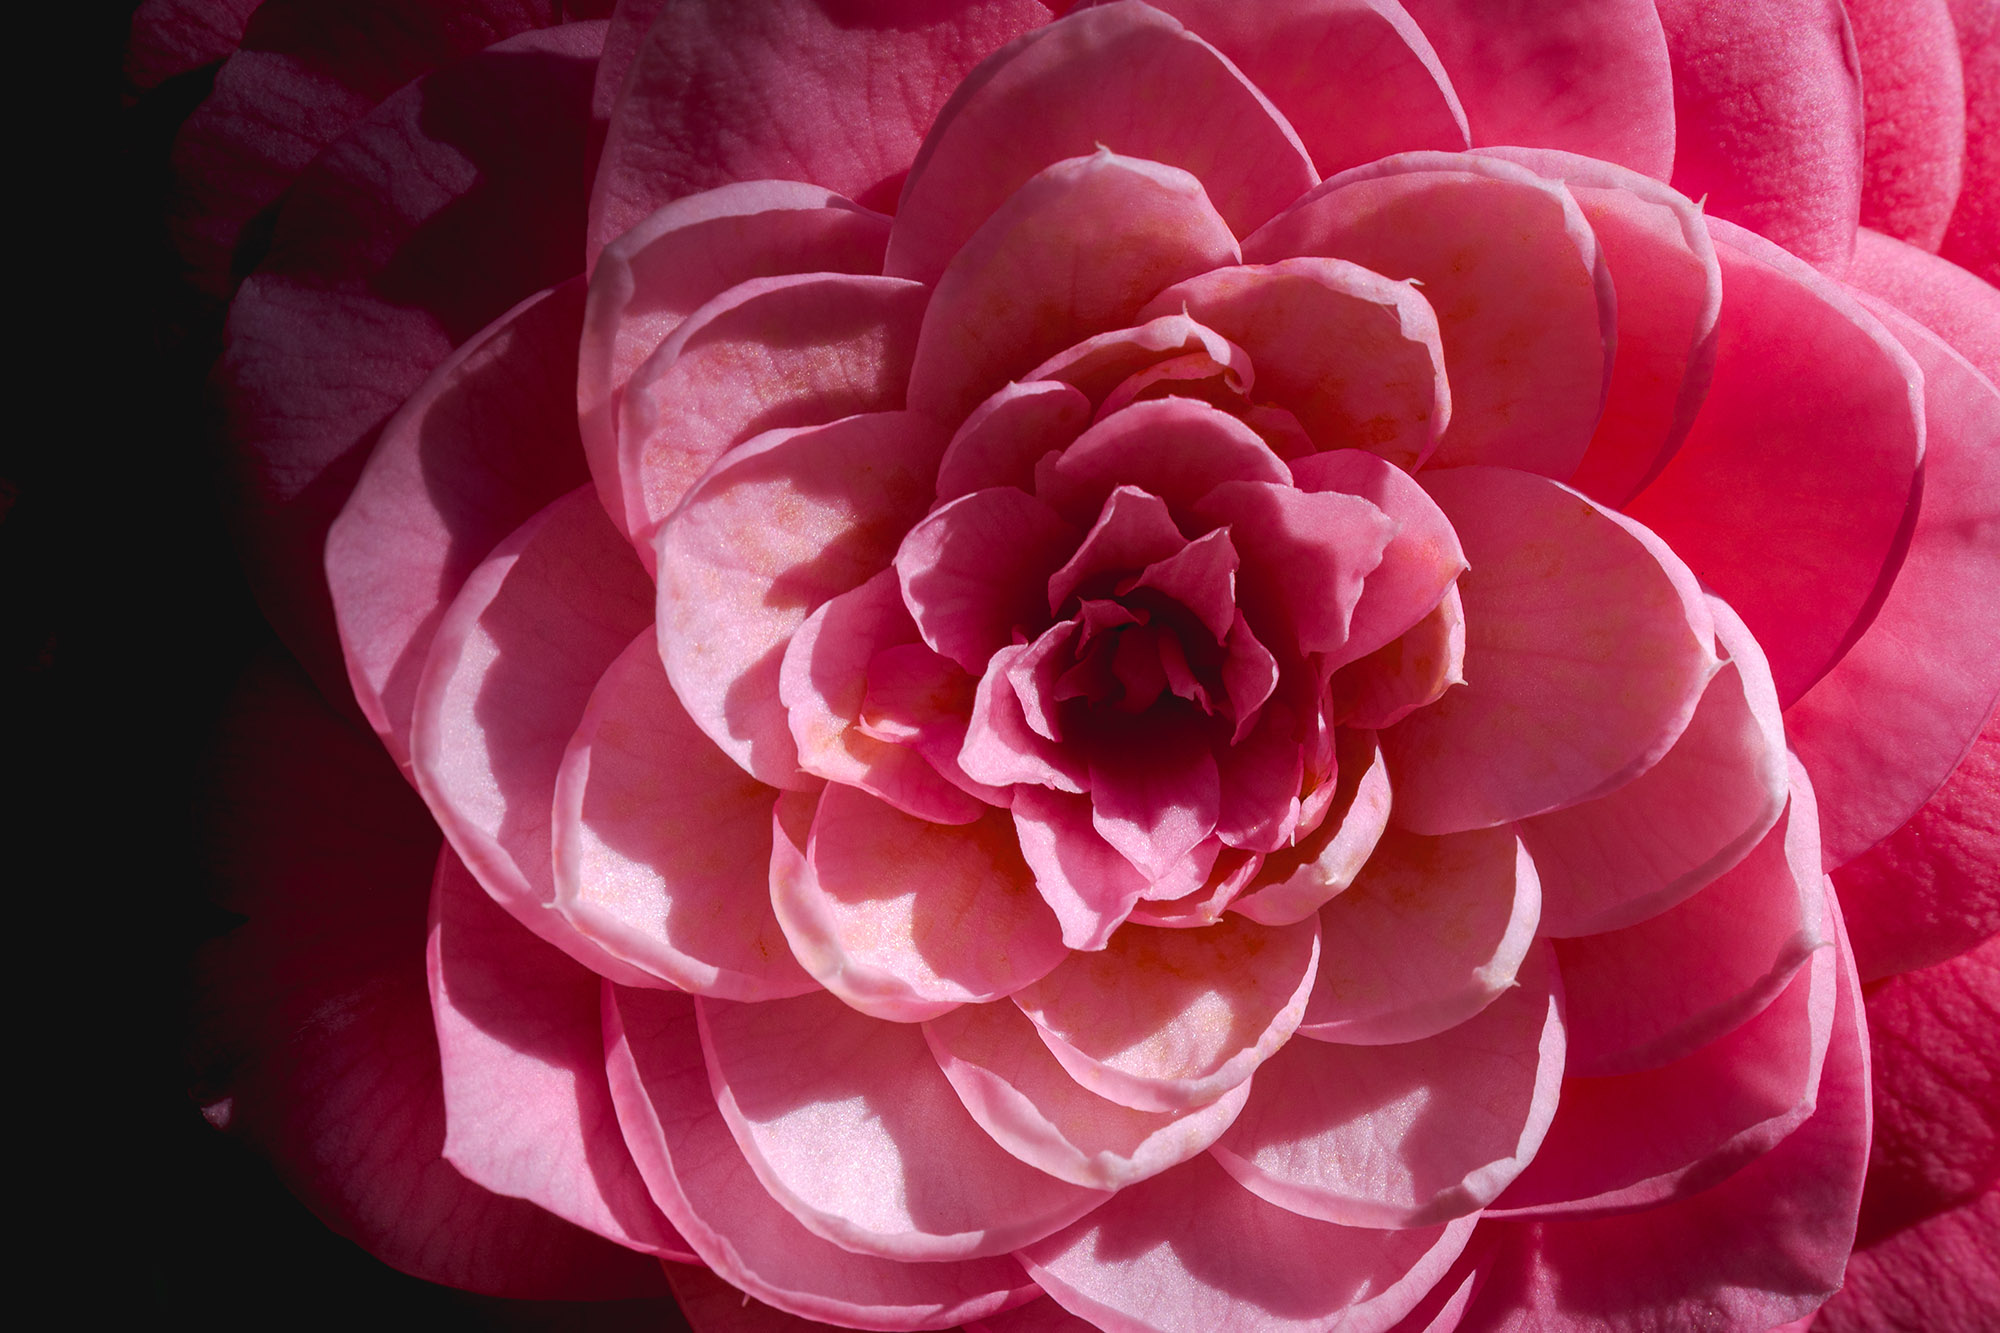 A pink flower with rows of concentric petals